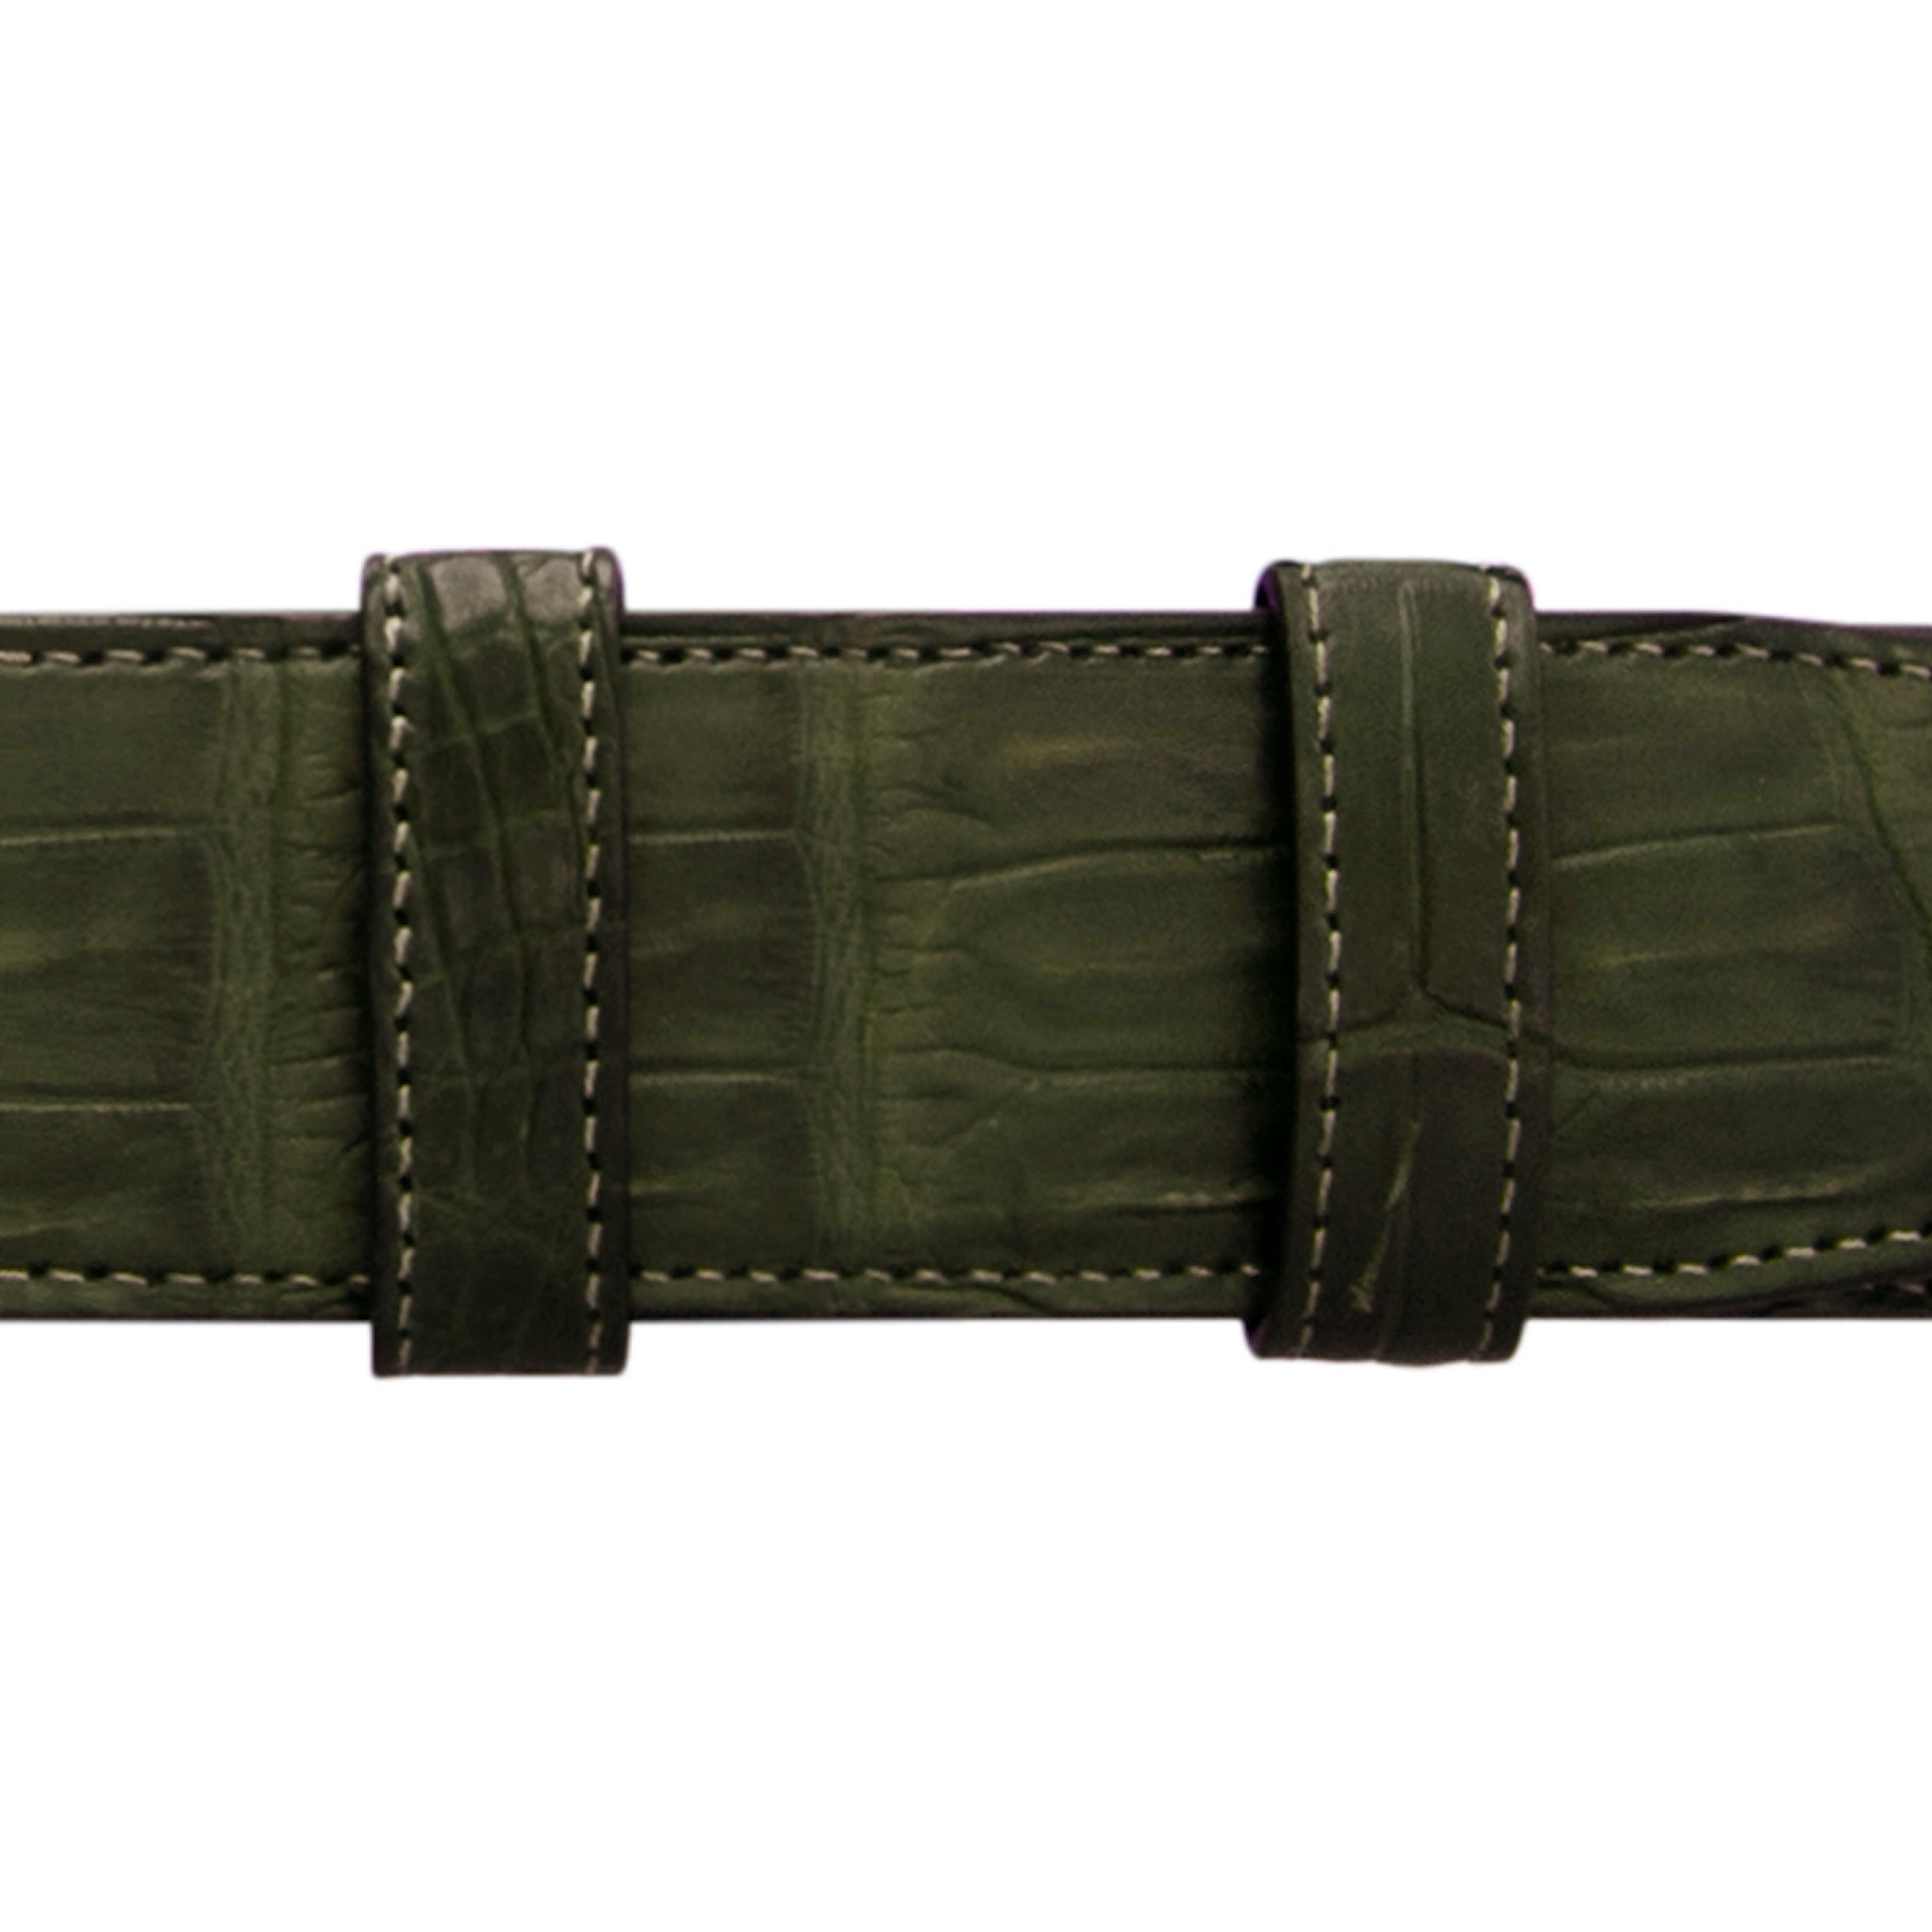 1 1/4" Olive Seasonal Belt with Derby Cocktail Buckle in Polished Nickel